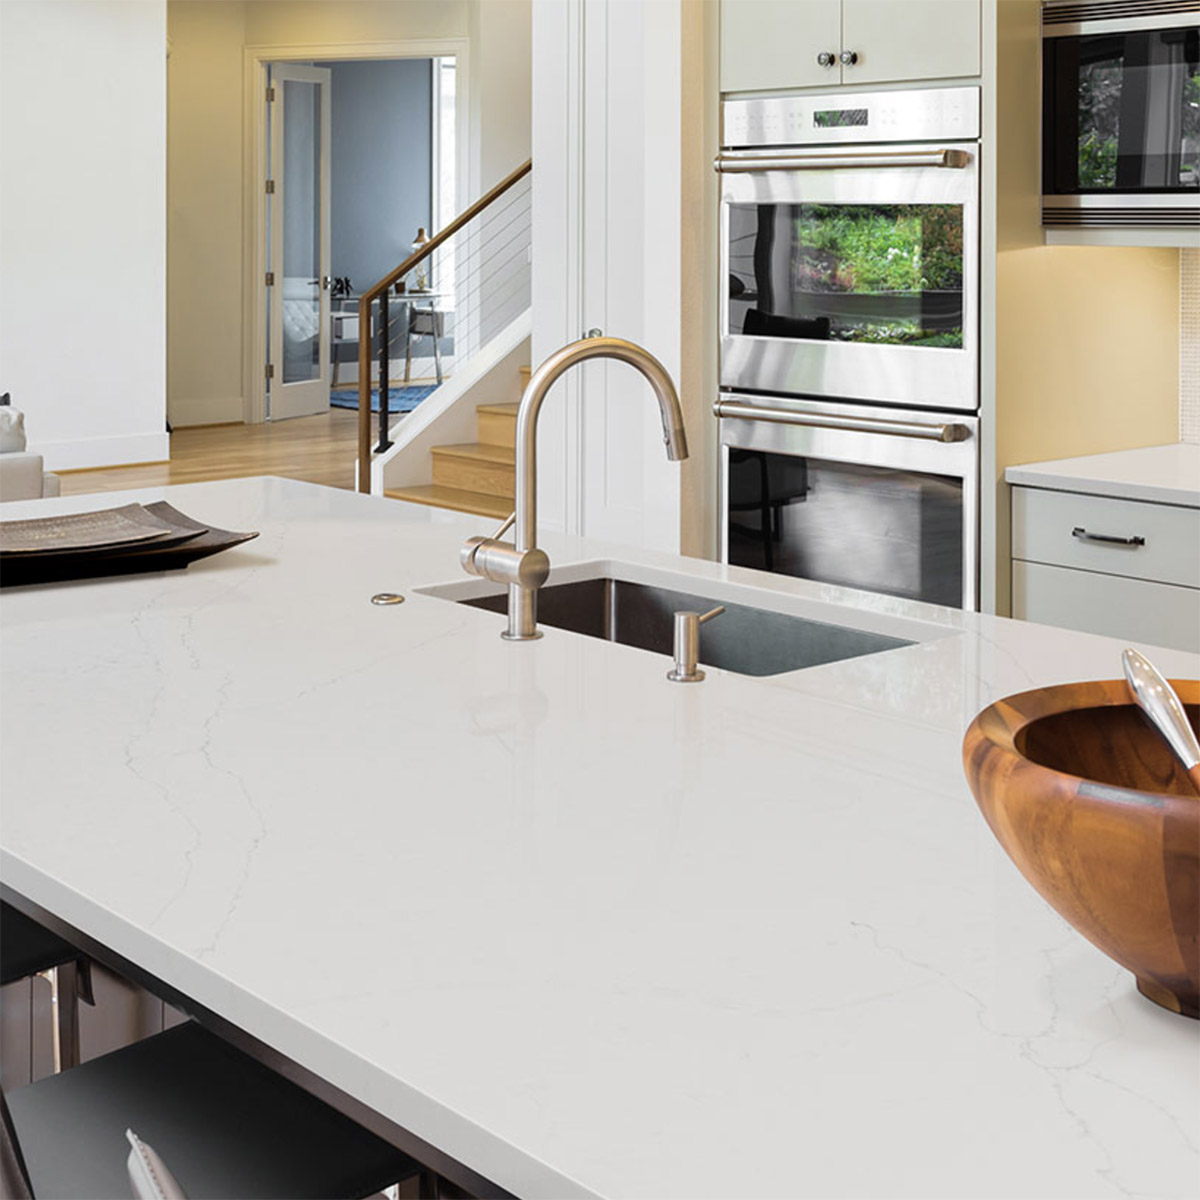 What Is The Most Popular Countertop Color Kenda Snell